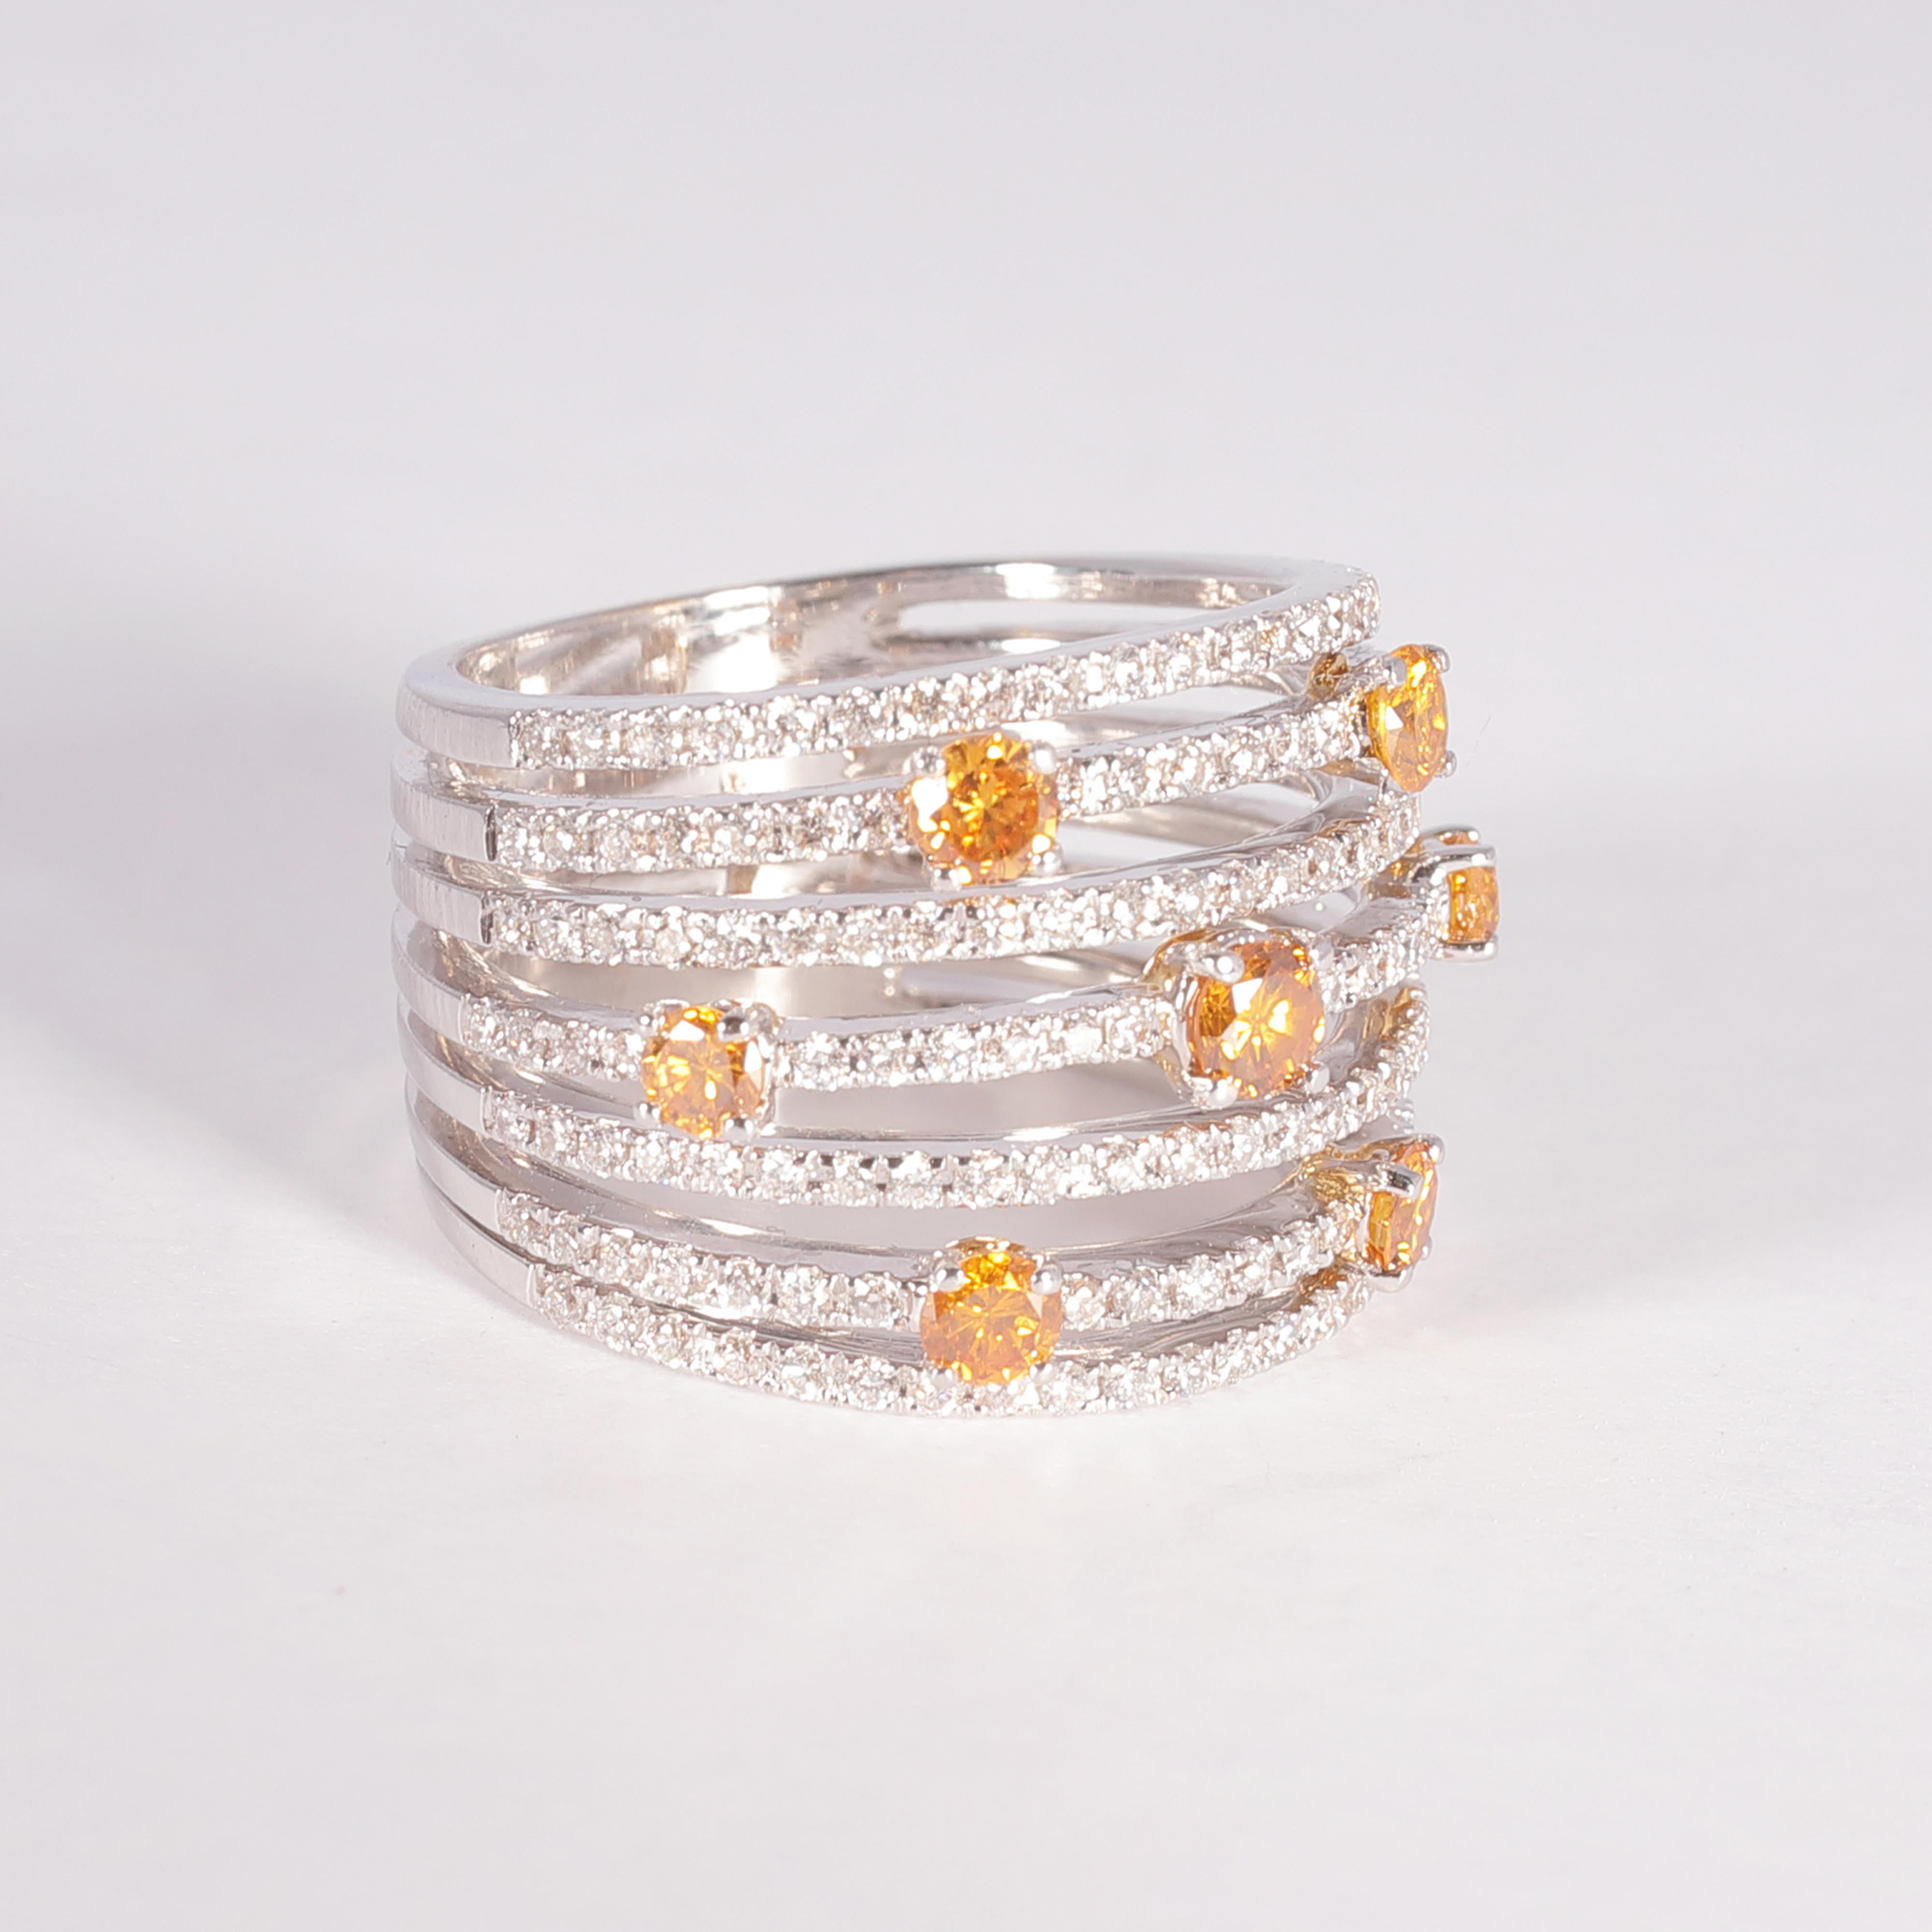 Purchased from famed London jewelry designer David Morris, this beauty features 7 fancy yellow diamonds, alternating on rows with bead-set, white diamonds.  The total stated weight of all of the diamonds is 1.55 carats.  Size 6 3/4. 